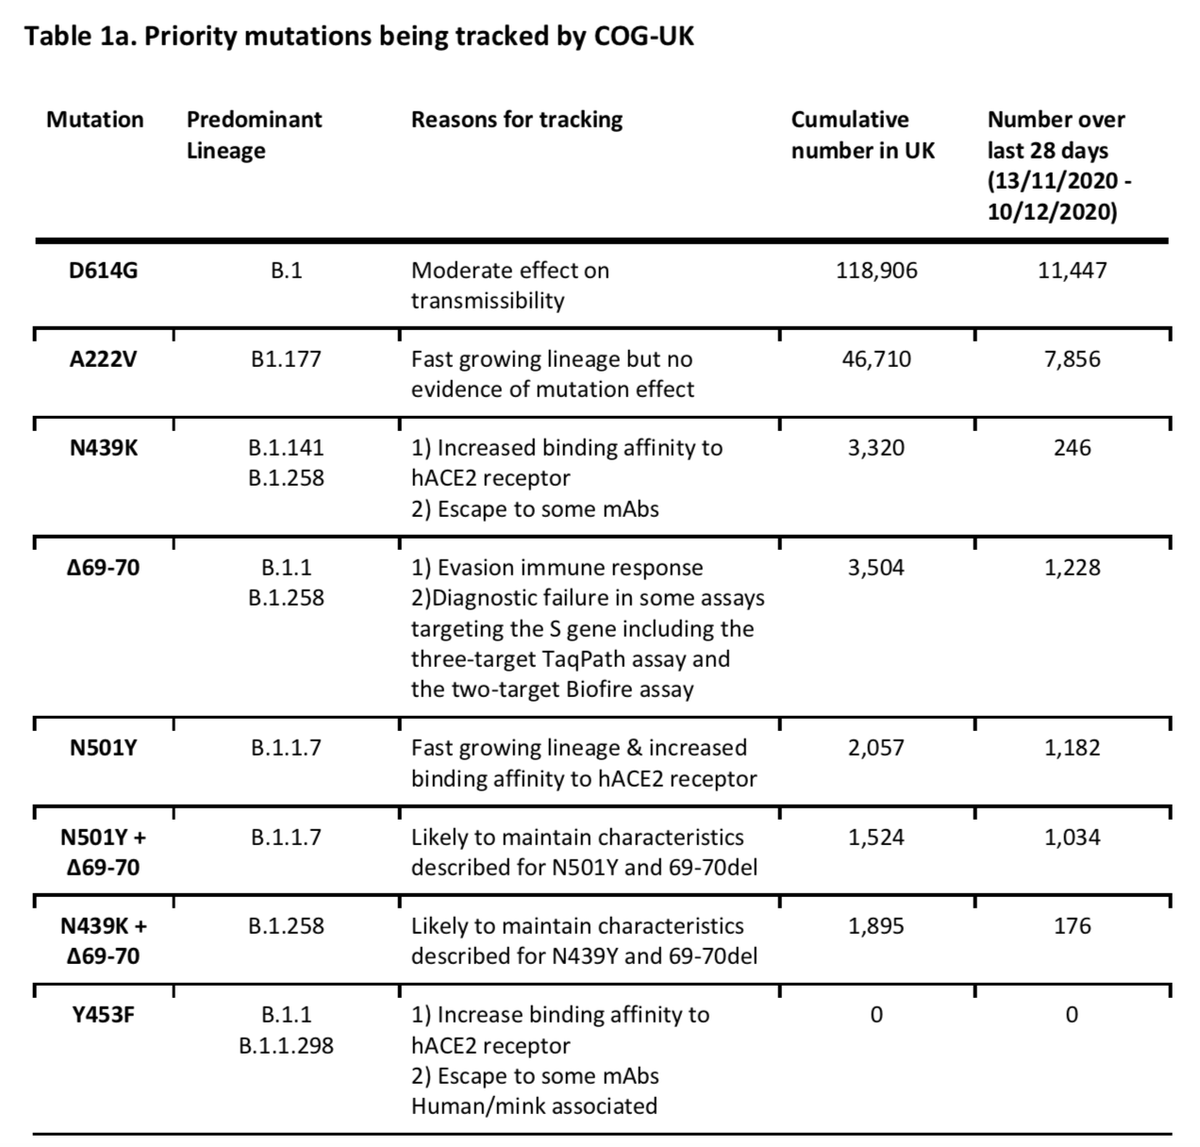 1- Genomic dataIn the UK, COG-UK undertakes sequencing of SARS-CoV-2 samples from ~ 10% of positive cases. This is an enormous effort, and helps scientists to identify mutations and track them over time. Here are some variants being tracked in the UK. 1/  https://www.cogconsortium.uk/wp-content/uploads/2020/12/Report-1_COG-UK_20-December-2020_SARS-CoV-2-Mutations_final.pdf